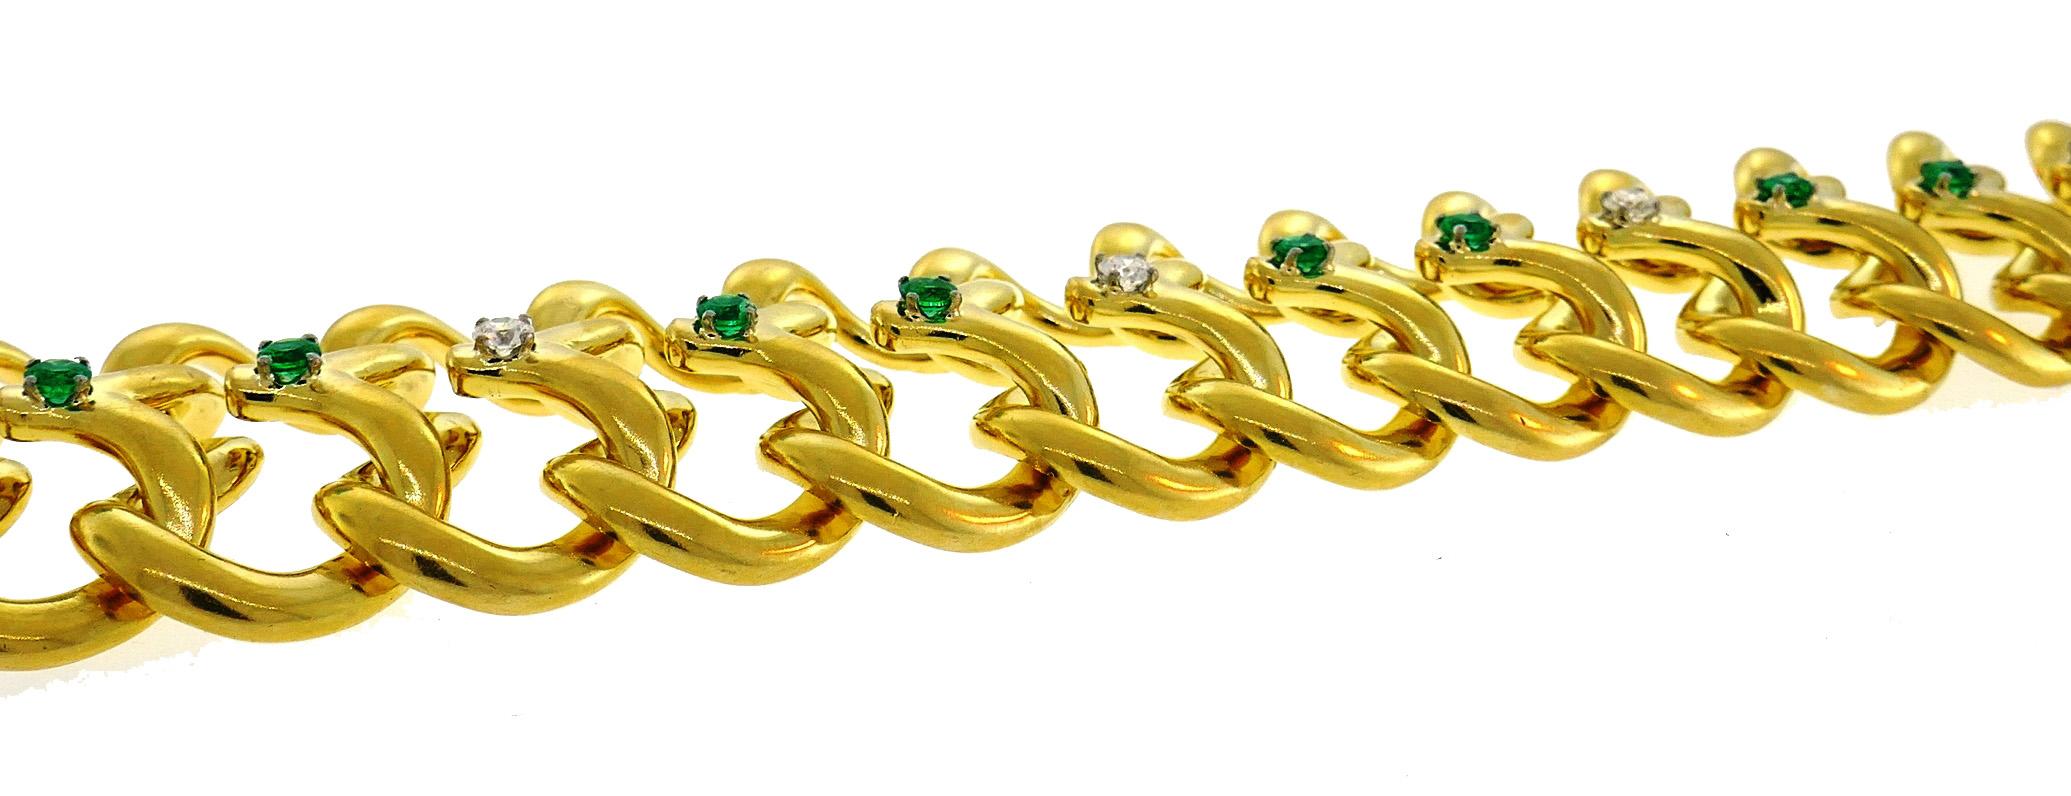 Van Cleef & Arpels Yellow Gold Bracelet with Diamond and Emerald 2